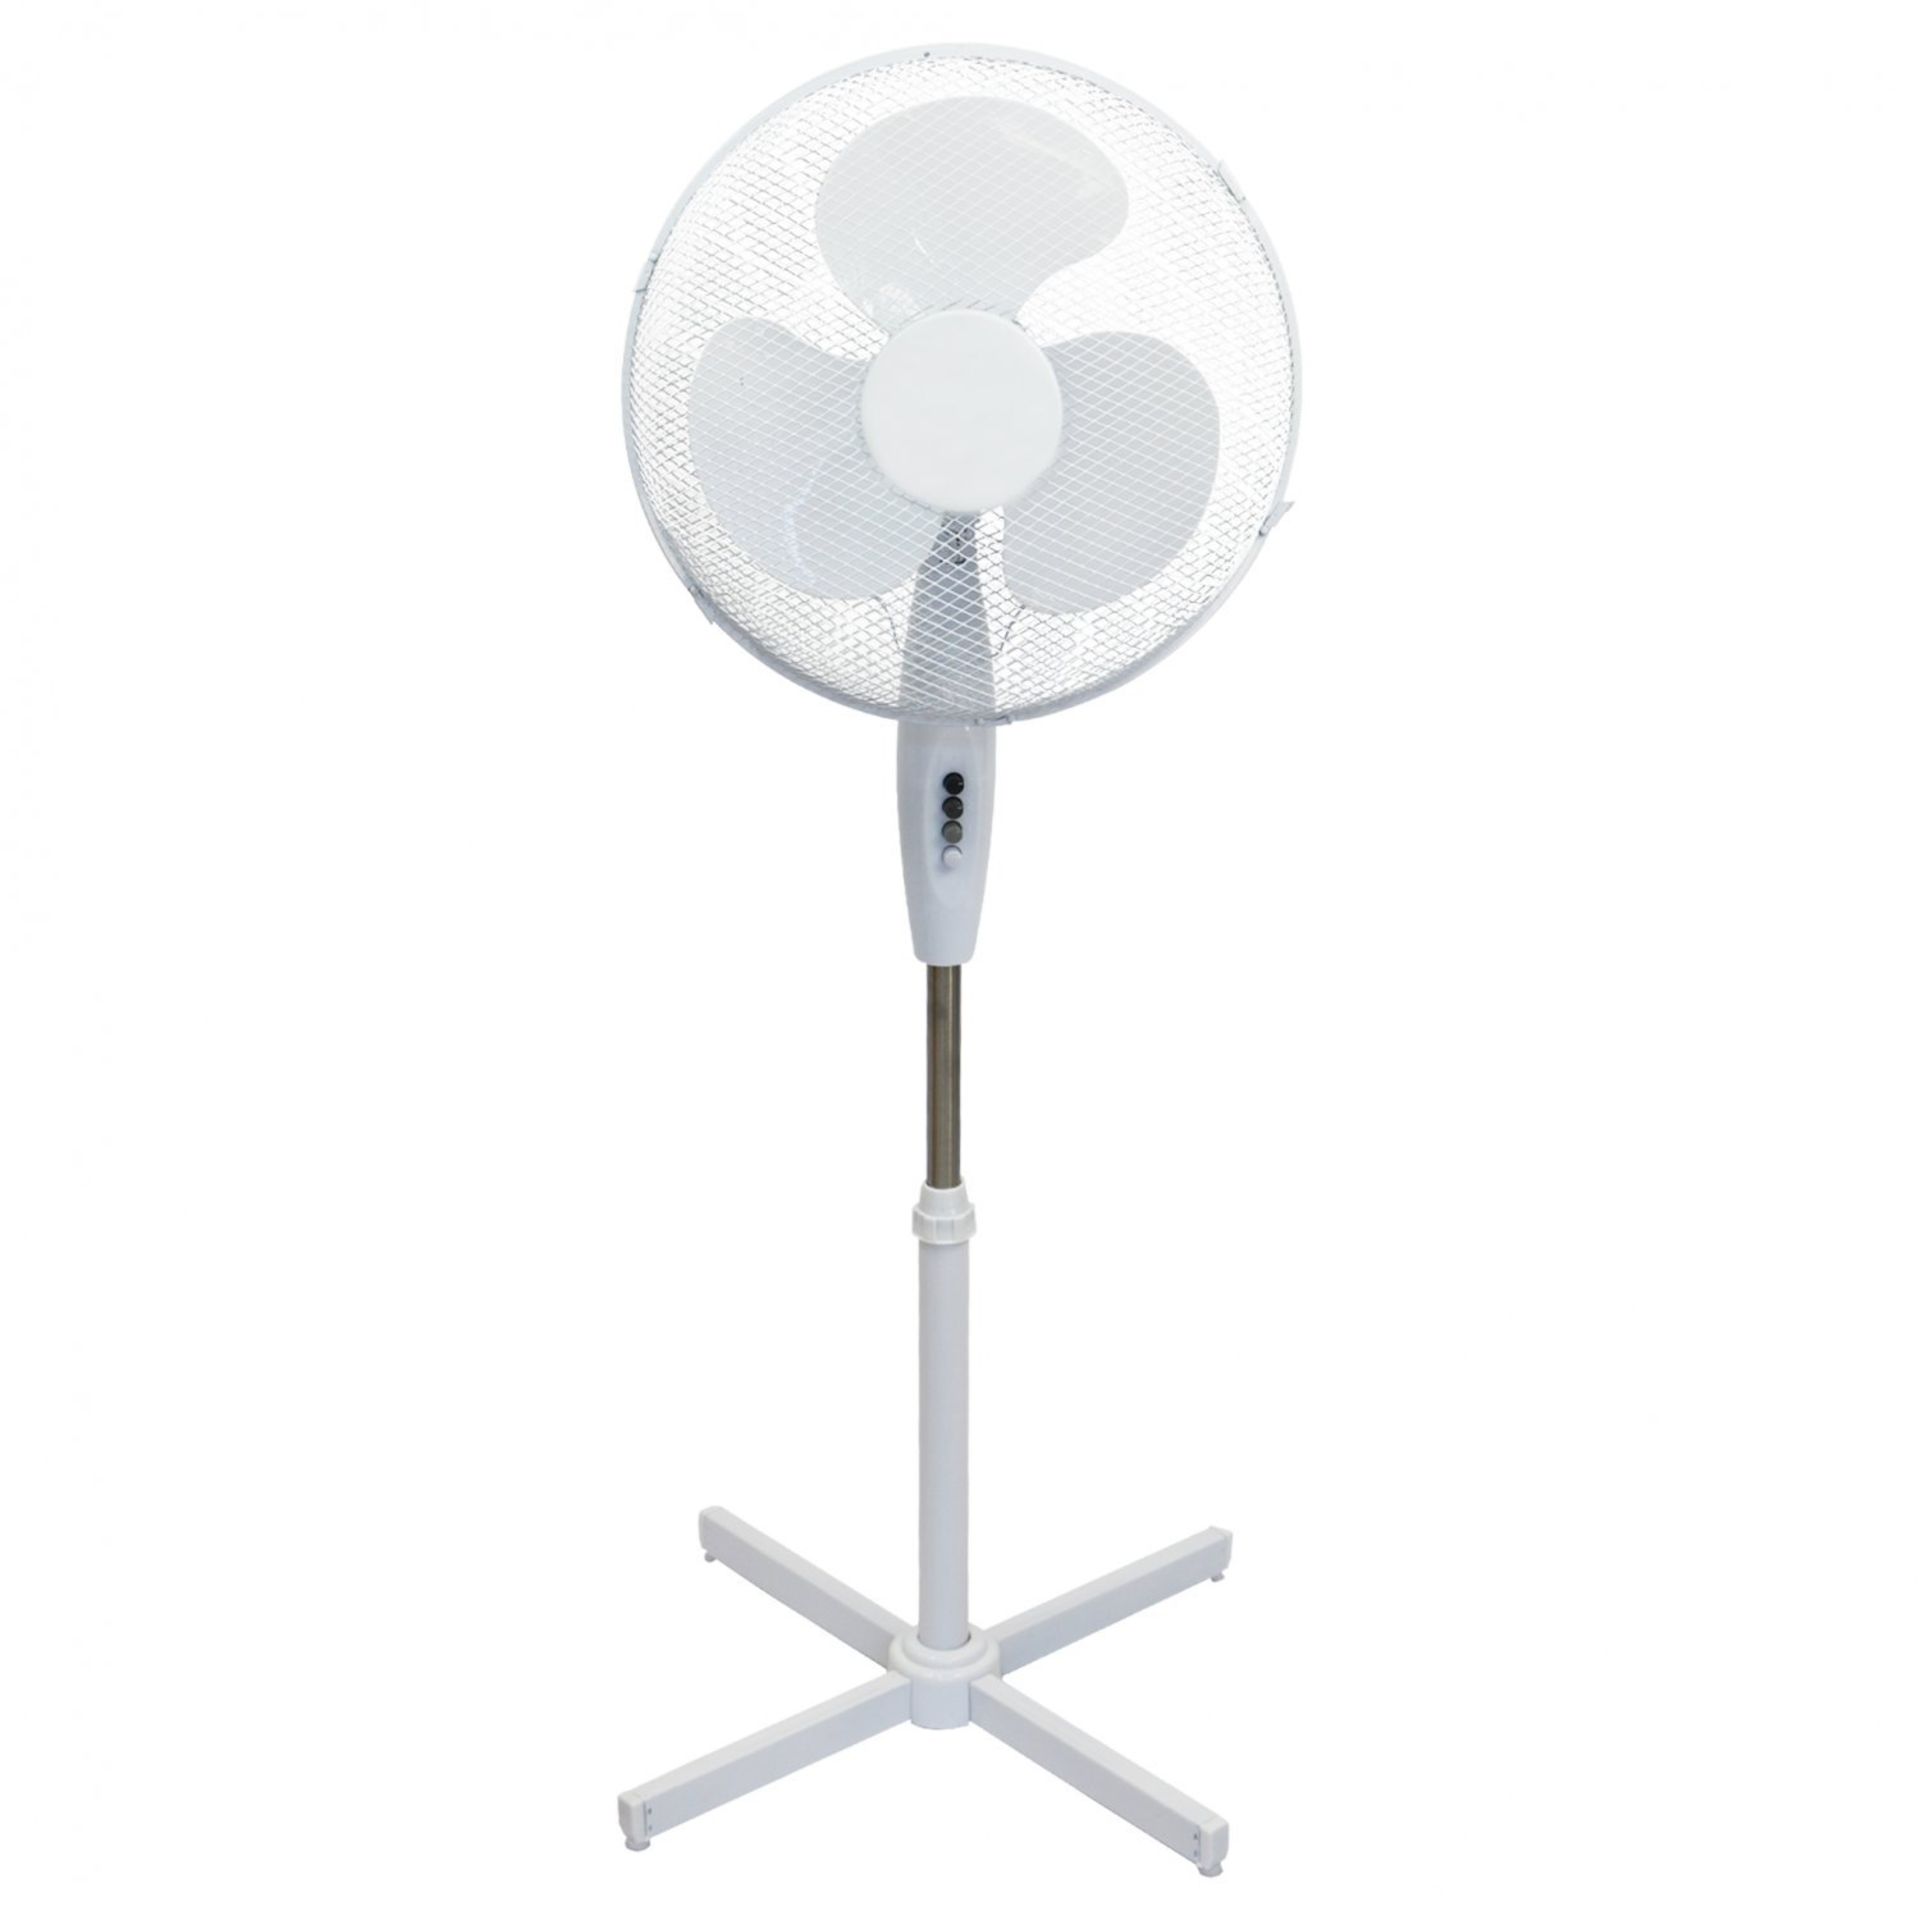 (G37) 16" Oscillating Pedestal Electric Fan 3 Speed Push Button Speed Control Cable Length Ap...